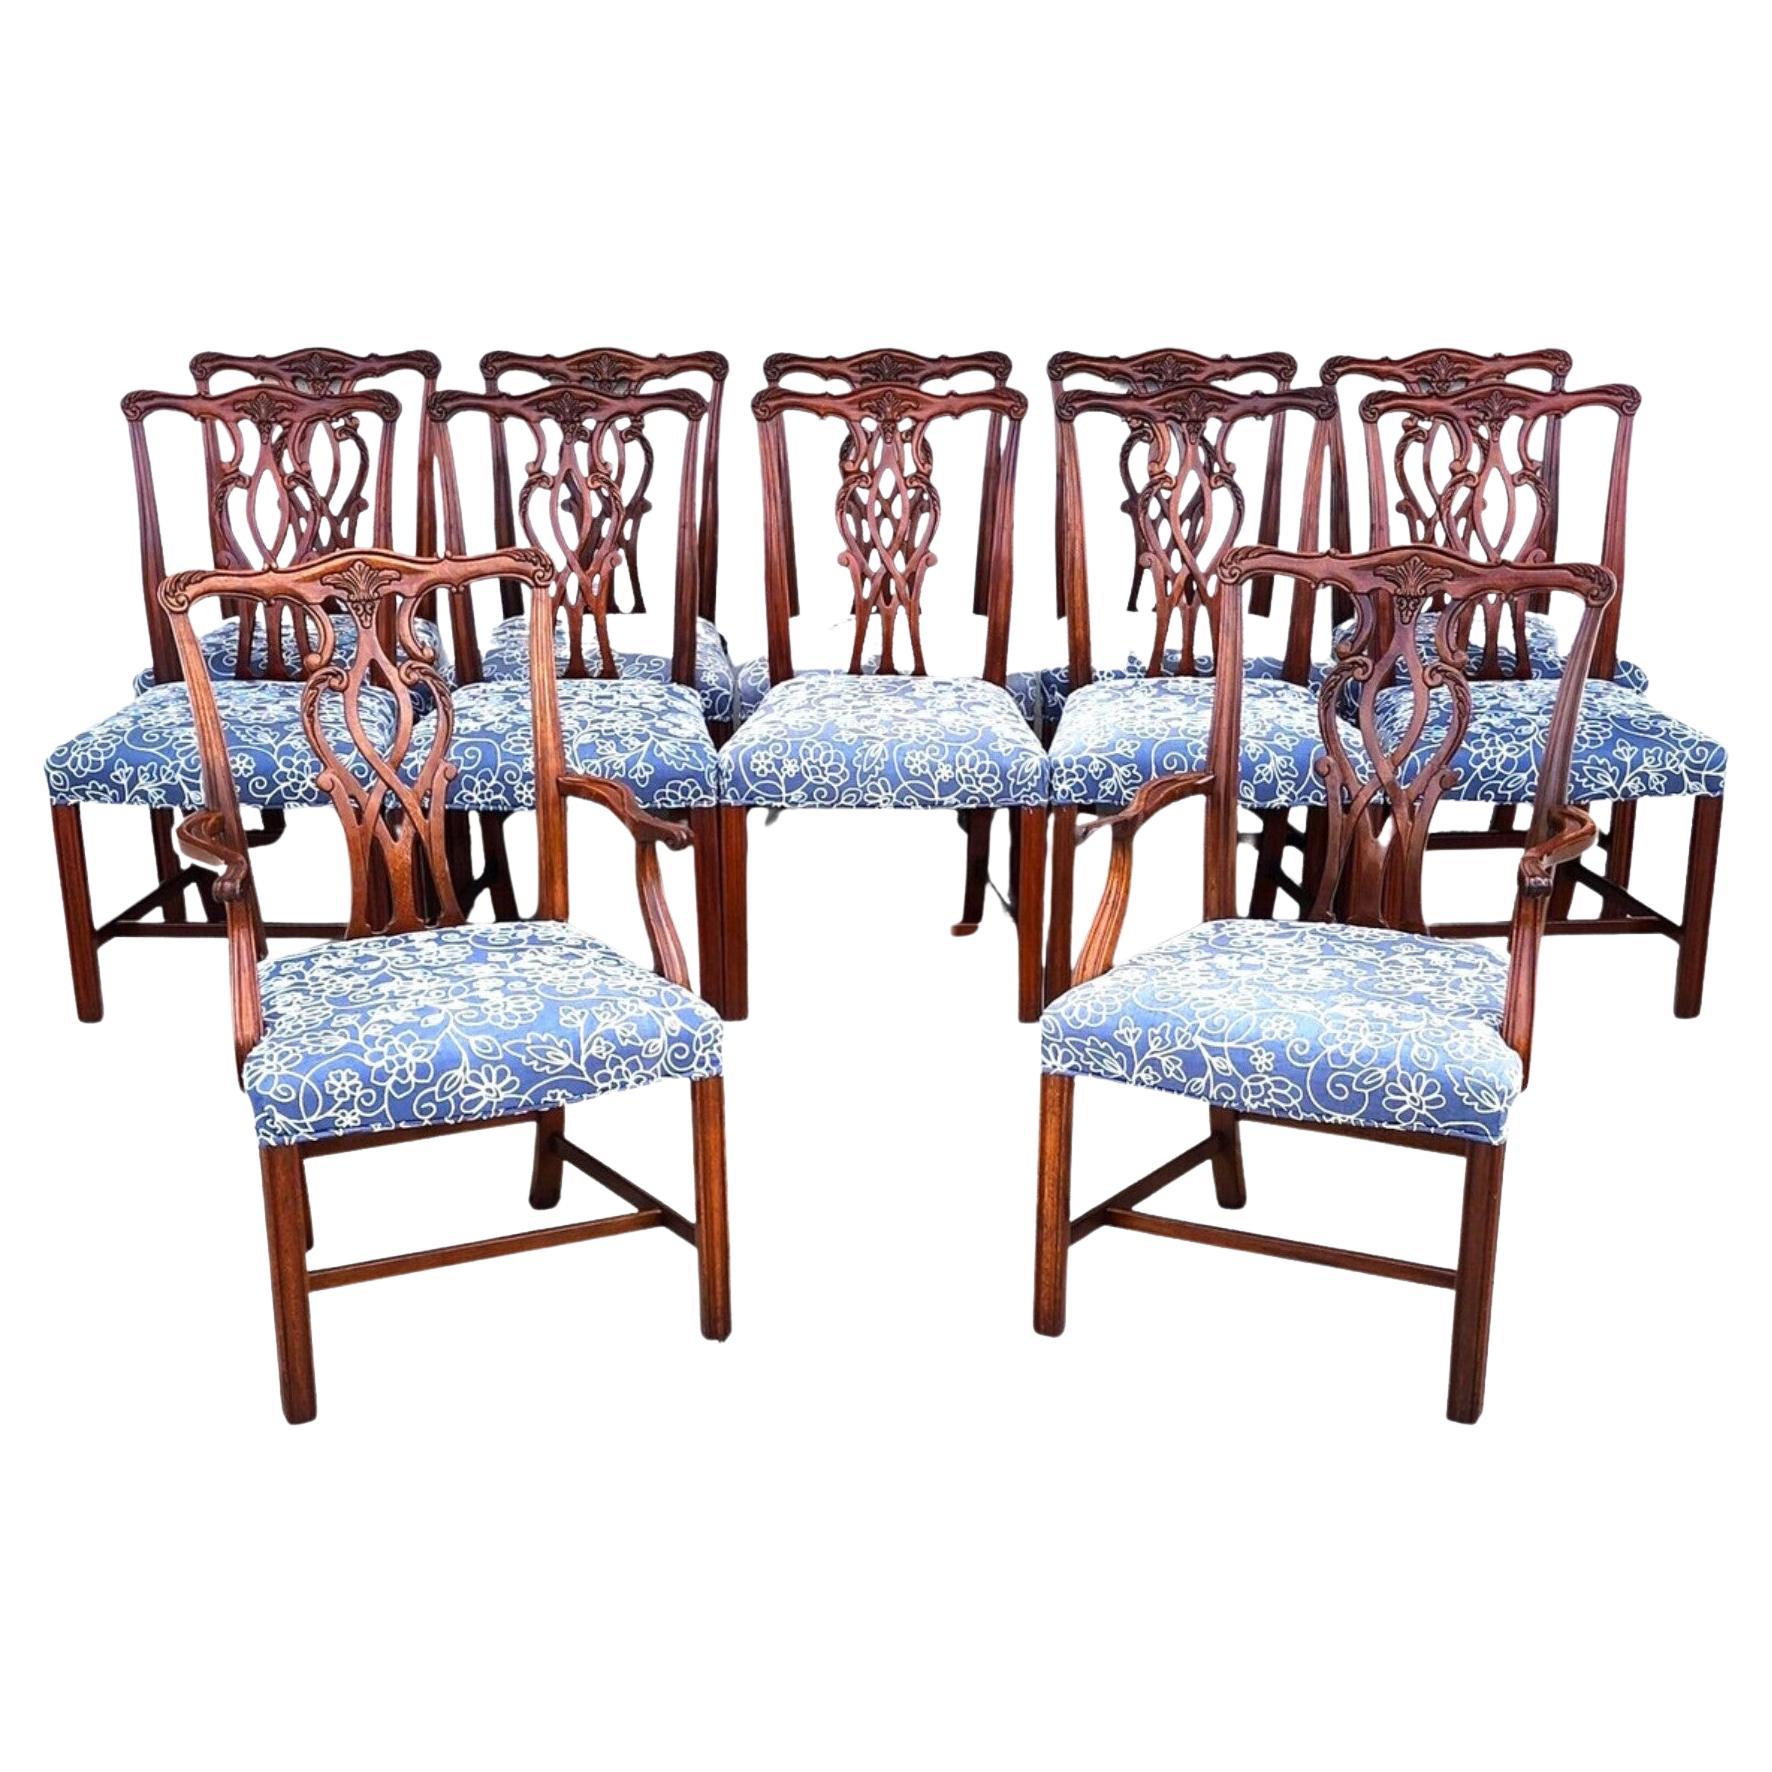 Antique Chippendale Dining Chairs Mahogany - Set of 12